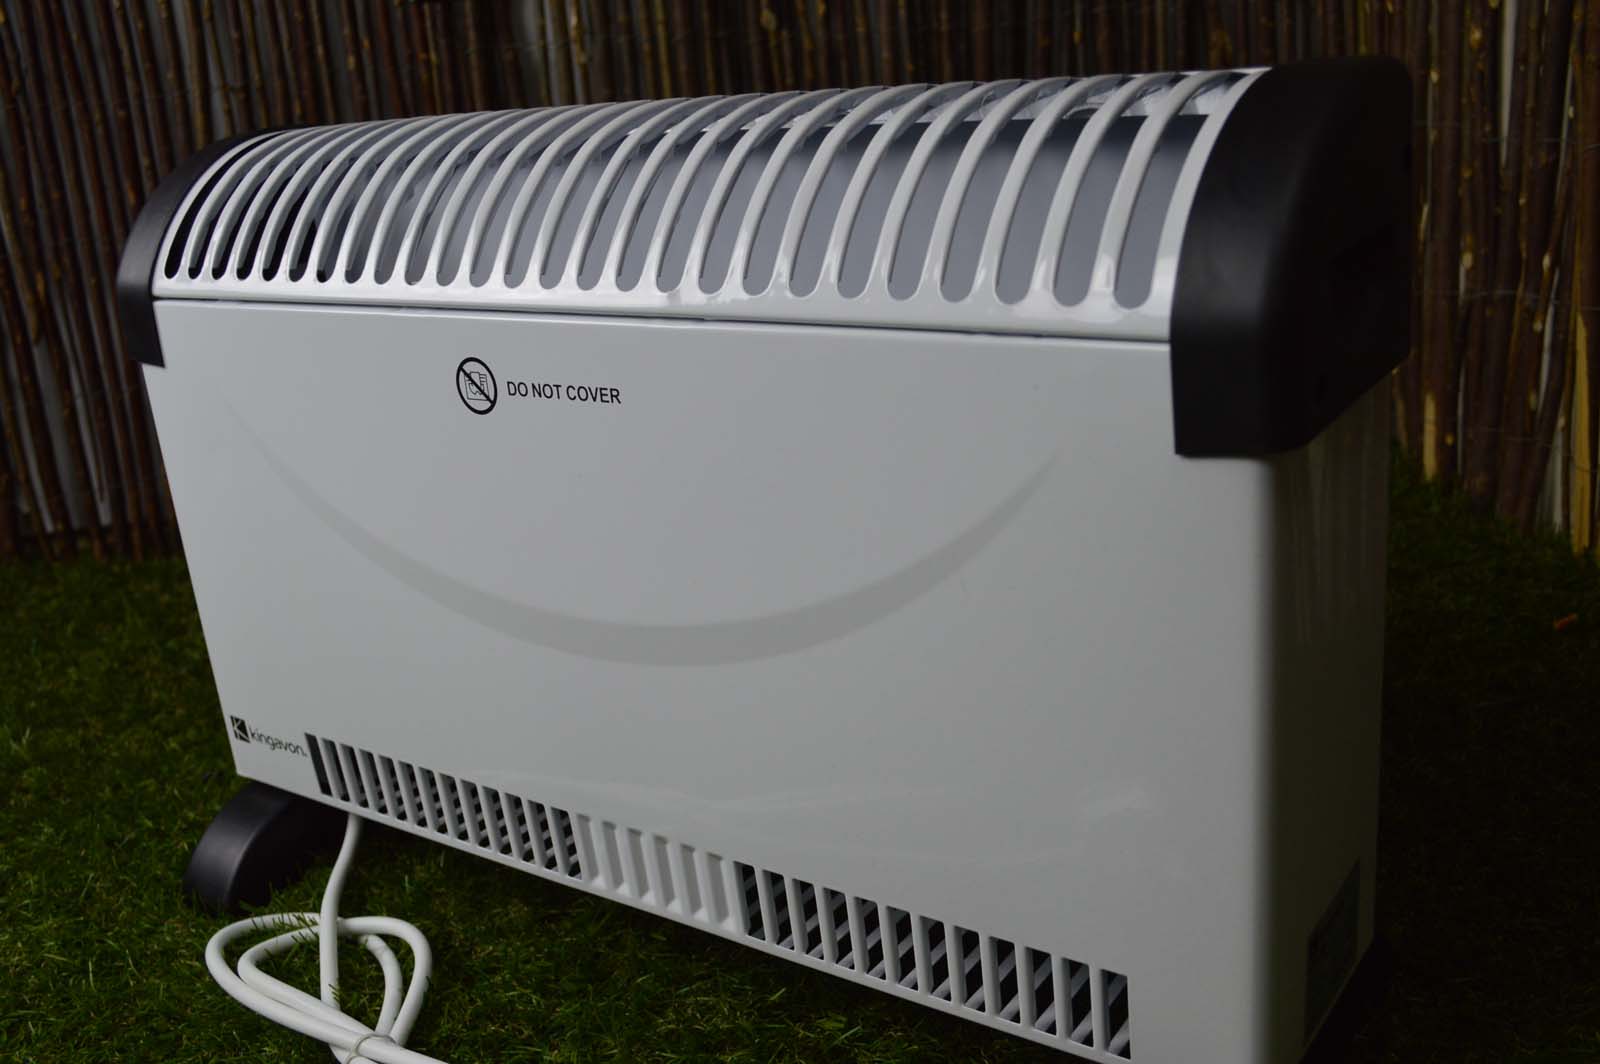 2kw Convector Heater with Thermostat & 3 Heat Settings